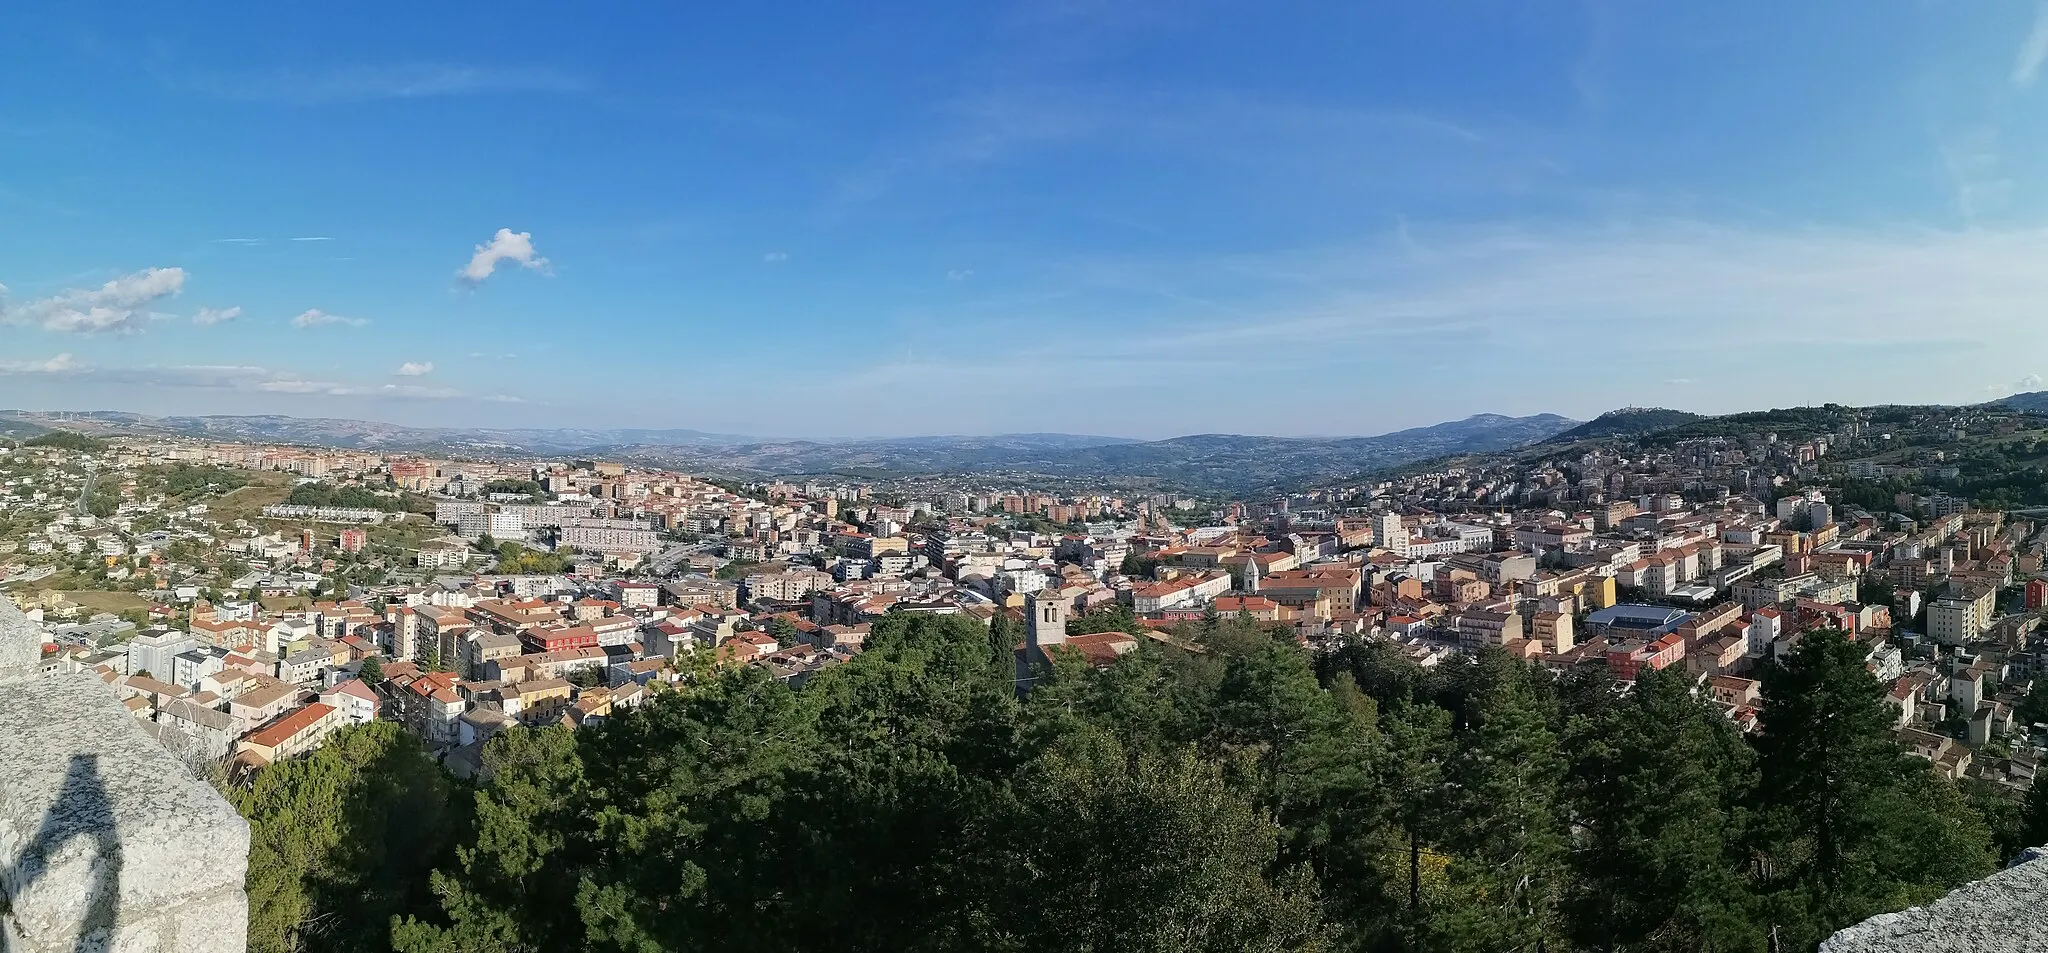 Photo showing: View of Campobasso from Monforte castle